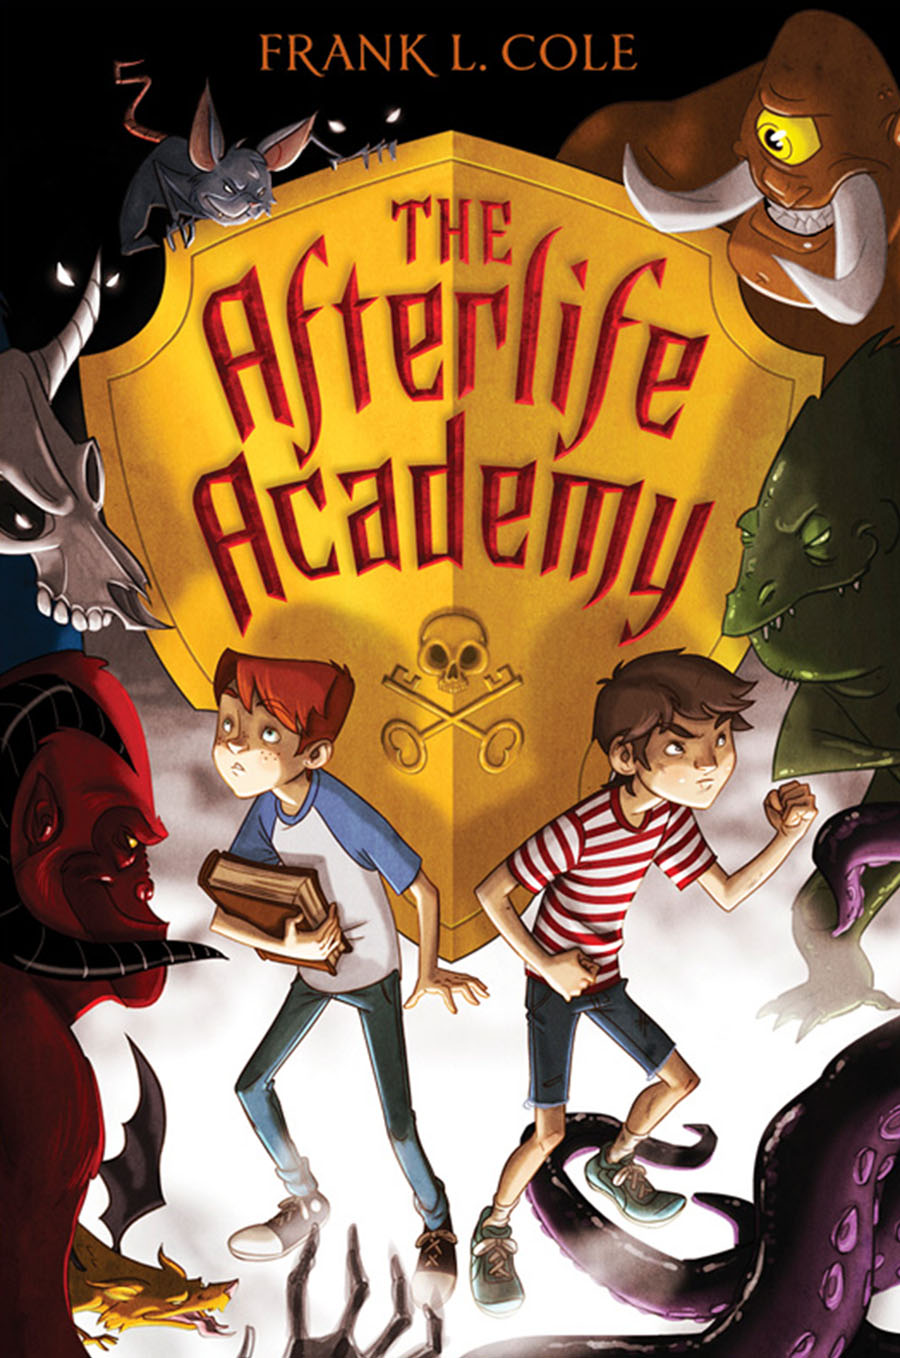 Cover the The Afterlife Academy; two boys standing in front of a yellow heraldric shield with the title on it.